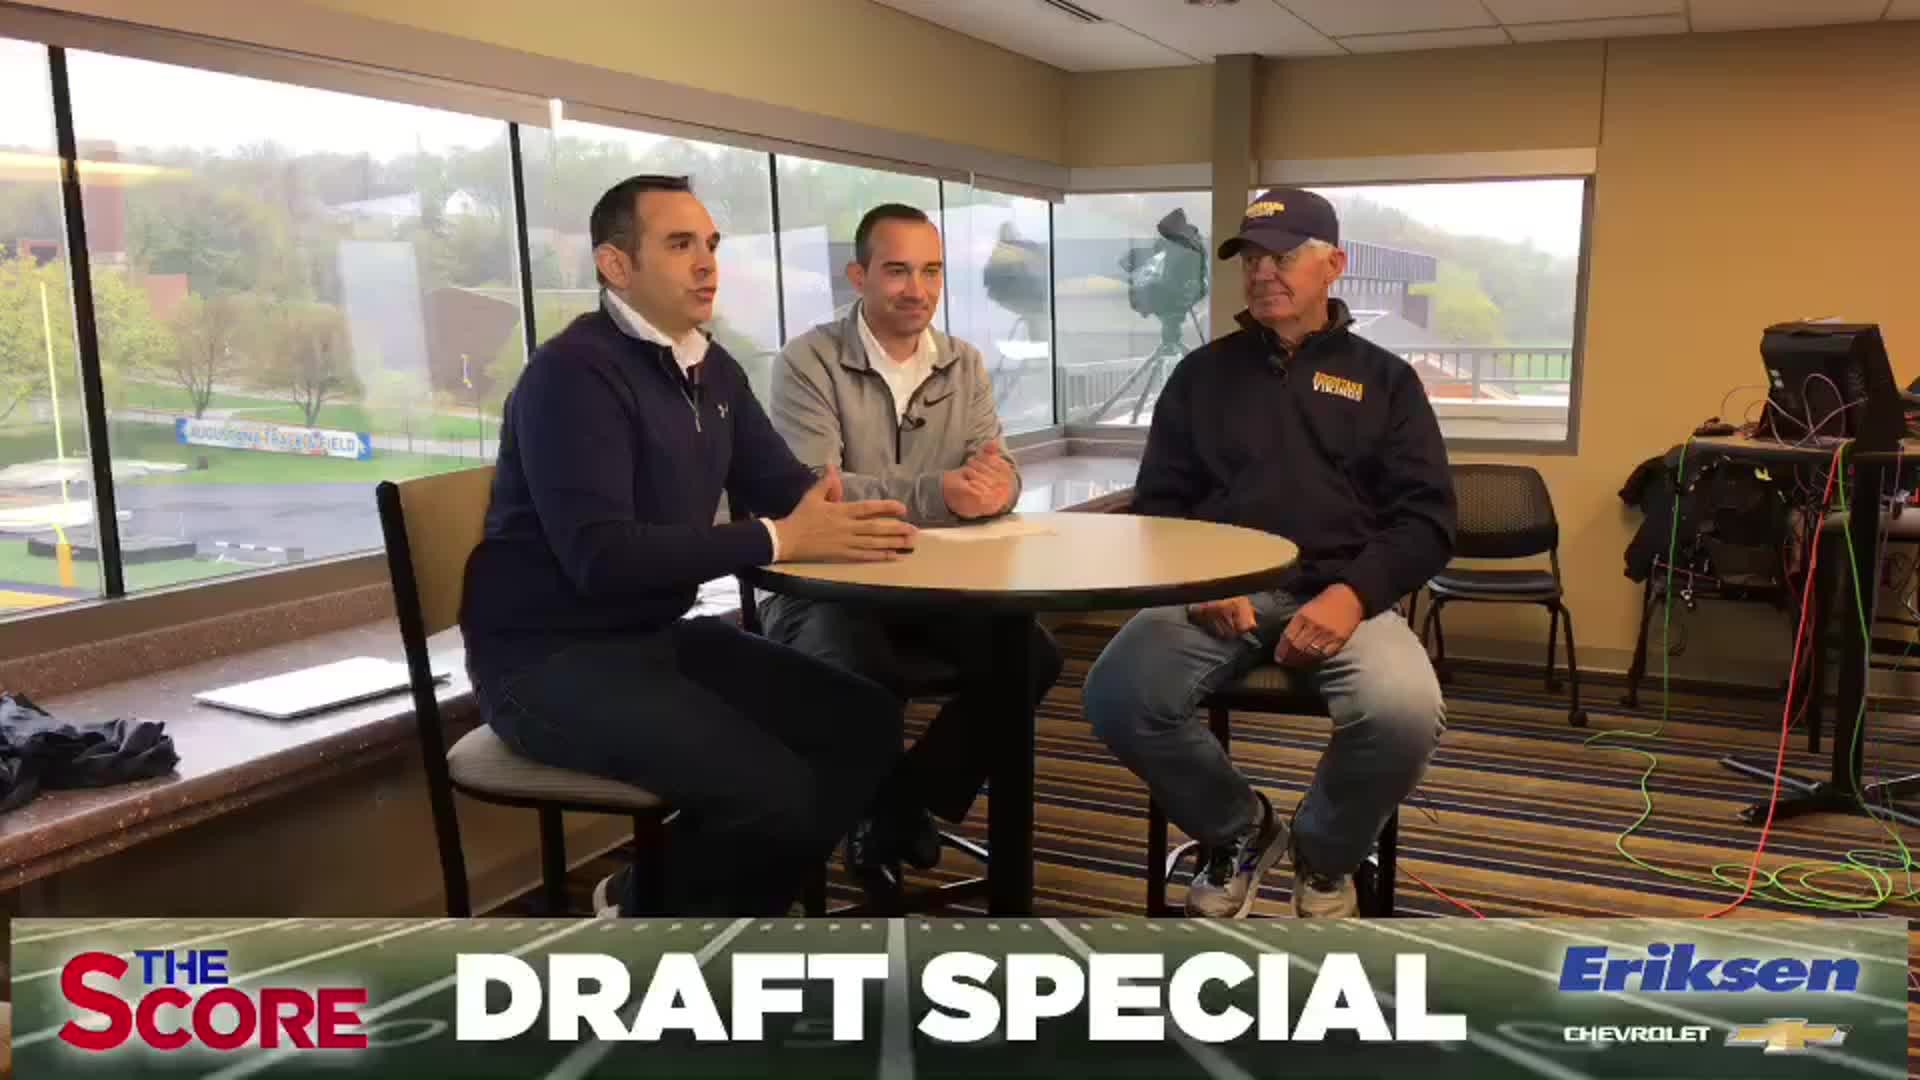 Former NFL player and Augie alum talks local Draft picks